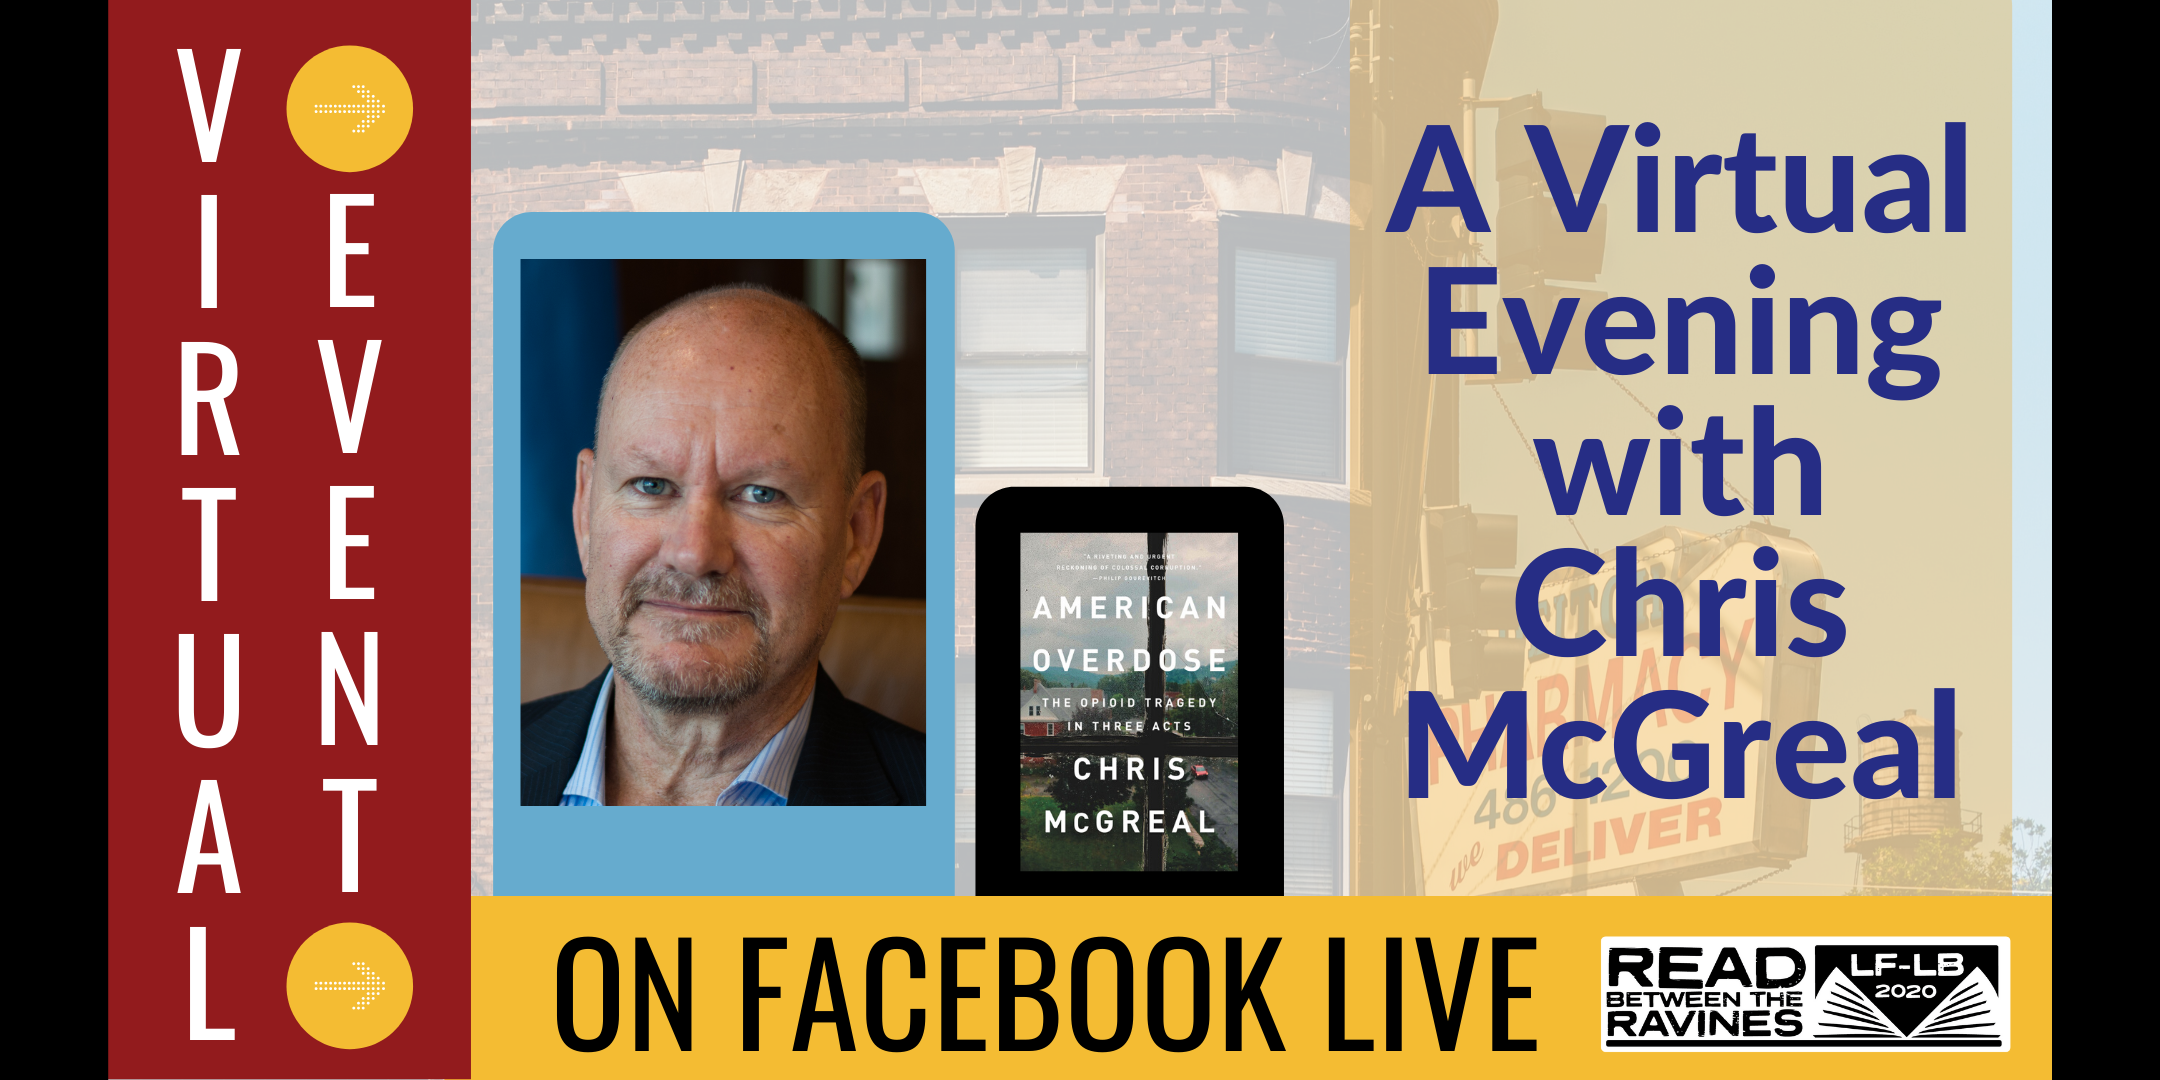 A VIrtual Evening with Chris McGreal